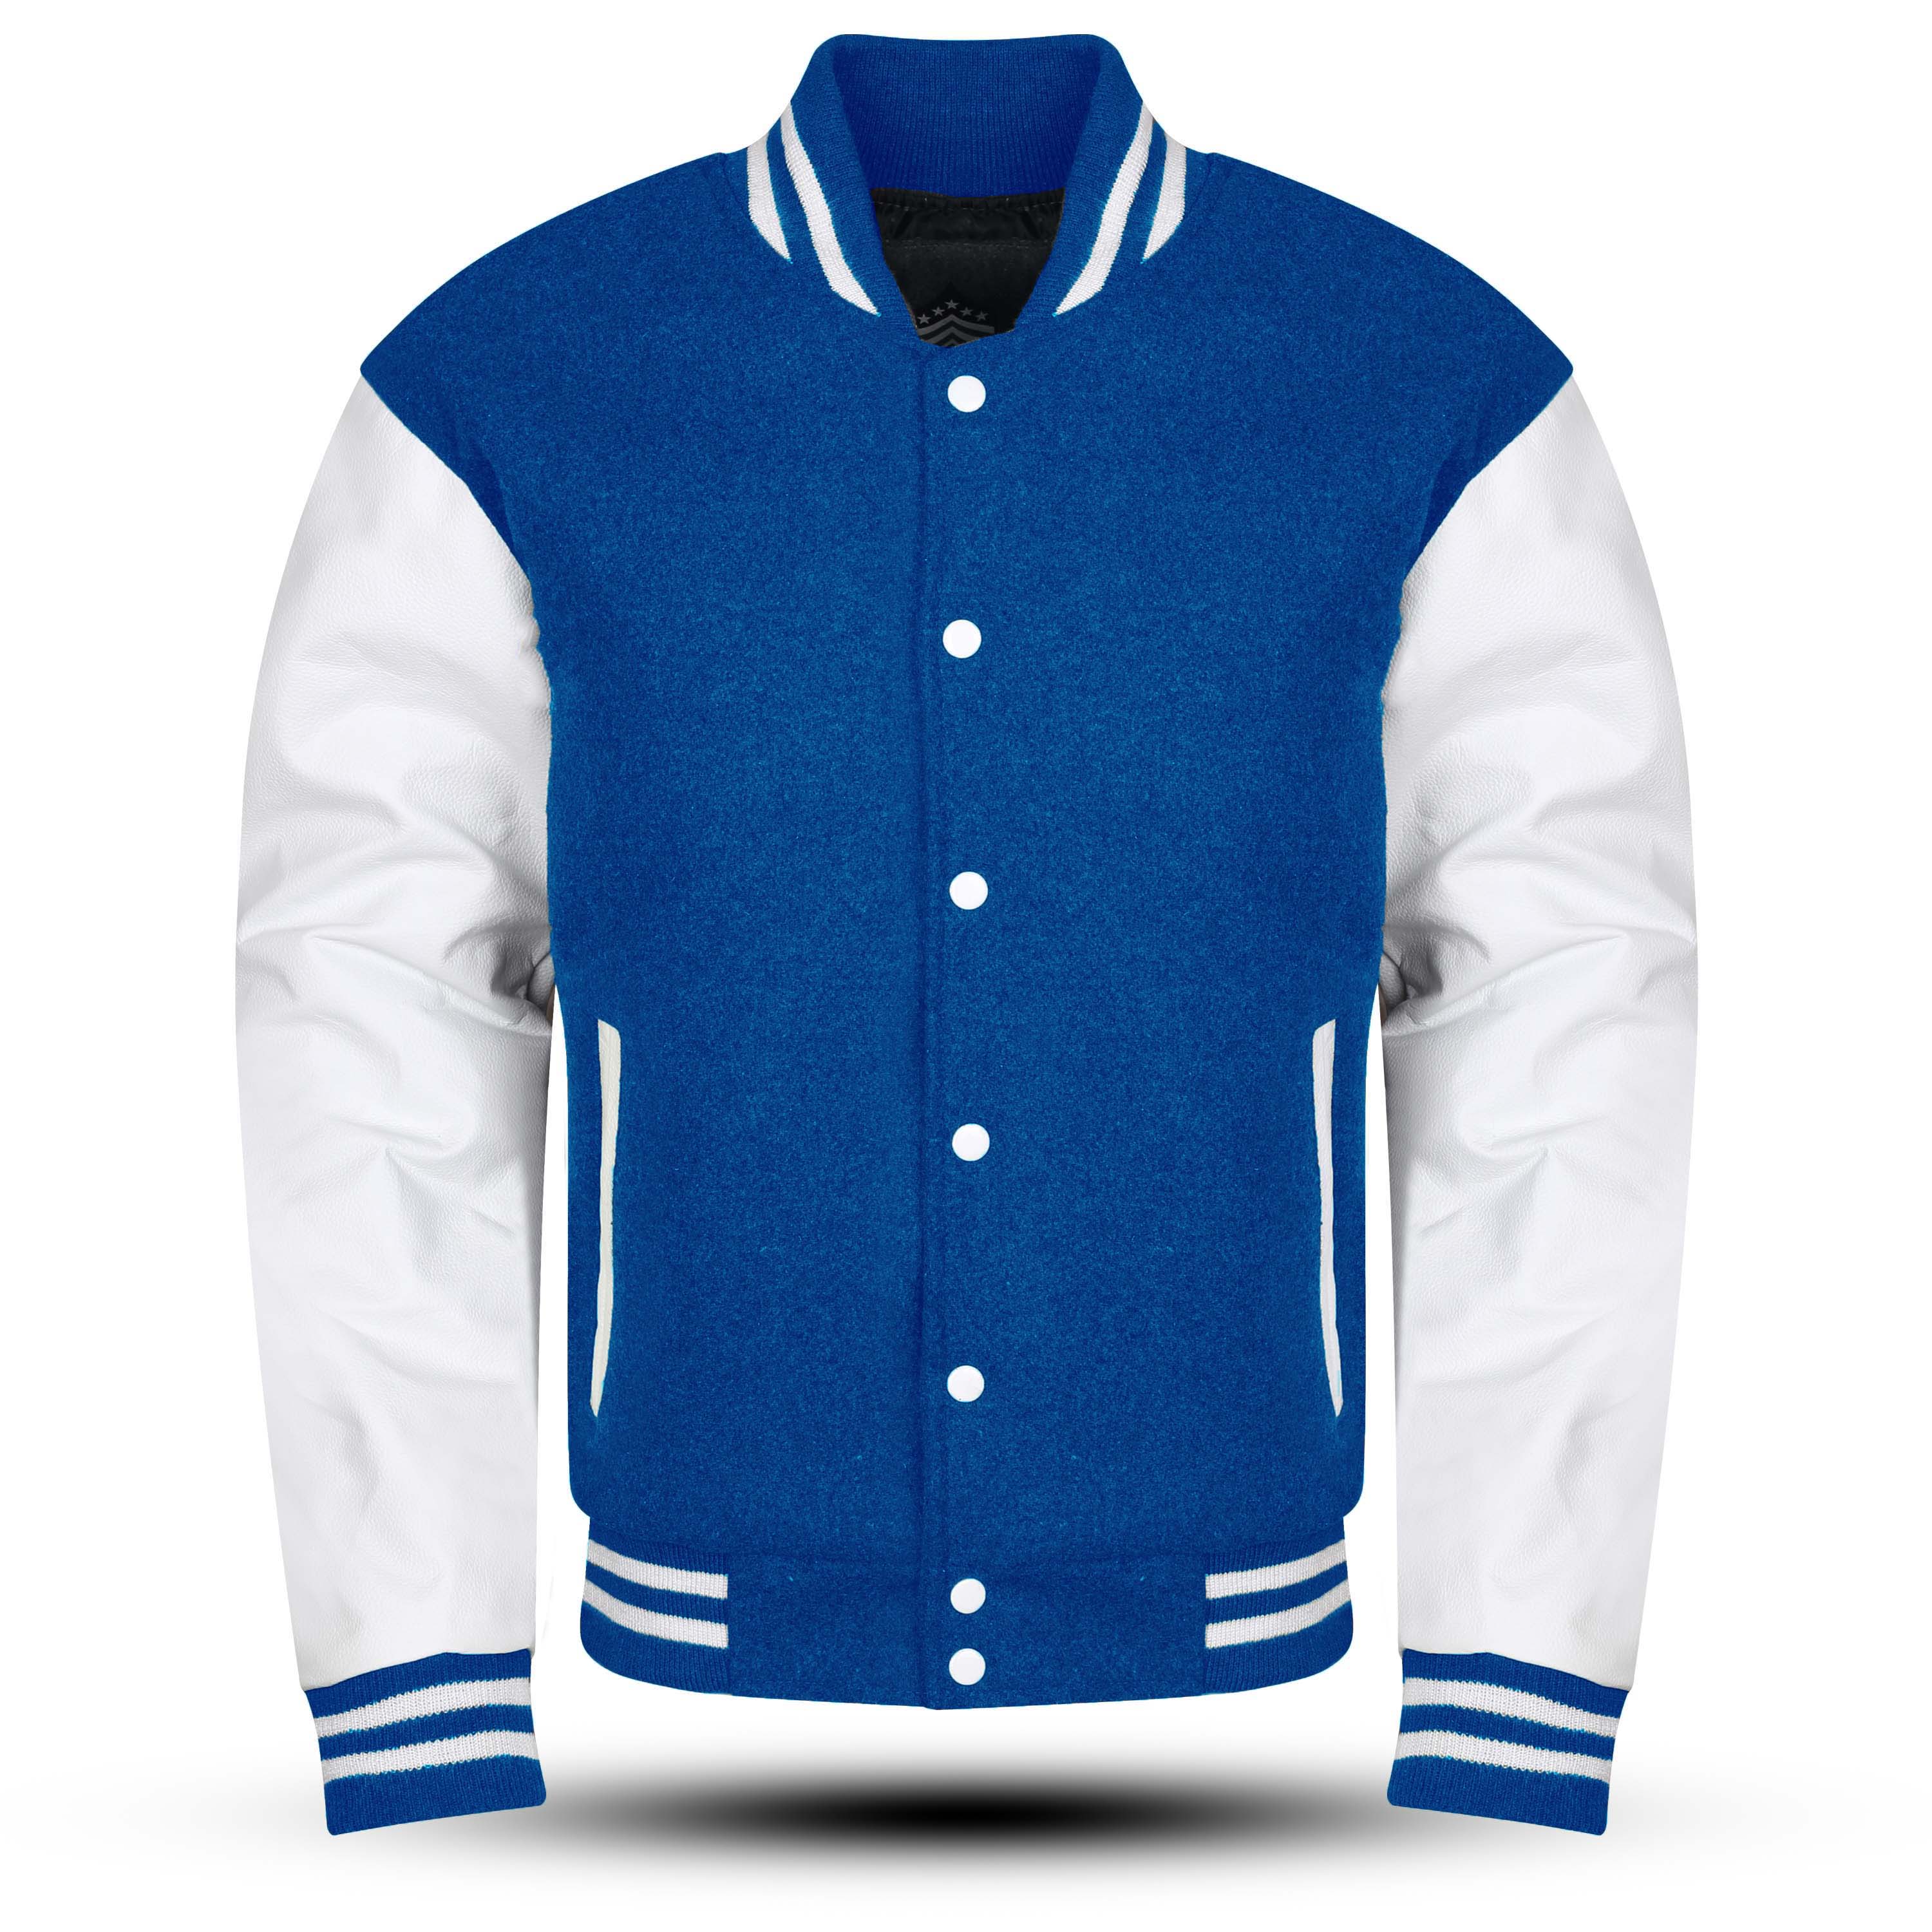 Varsity Jacket with Teal Wool Body and White Leather Sleeves Letterman ...